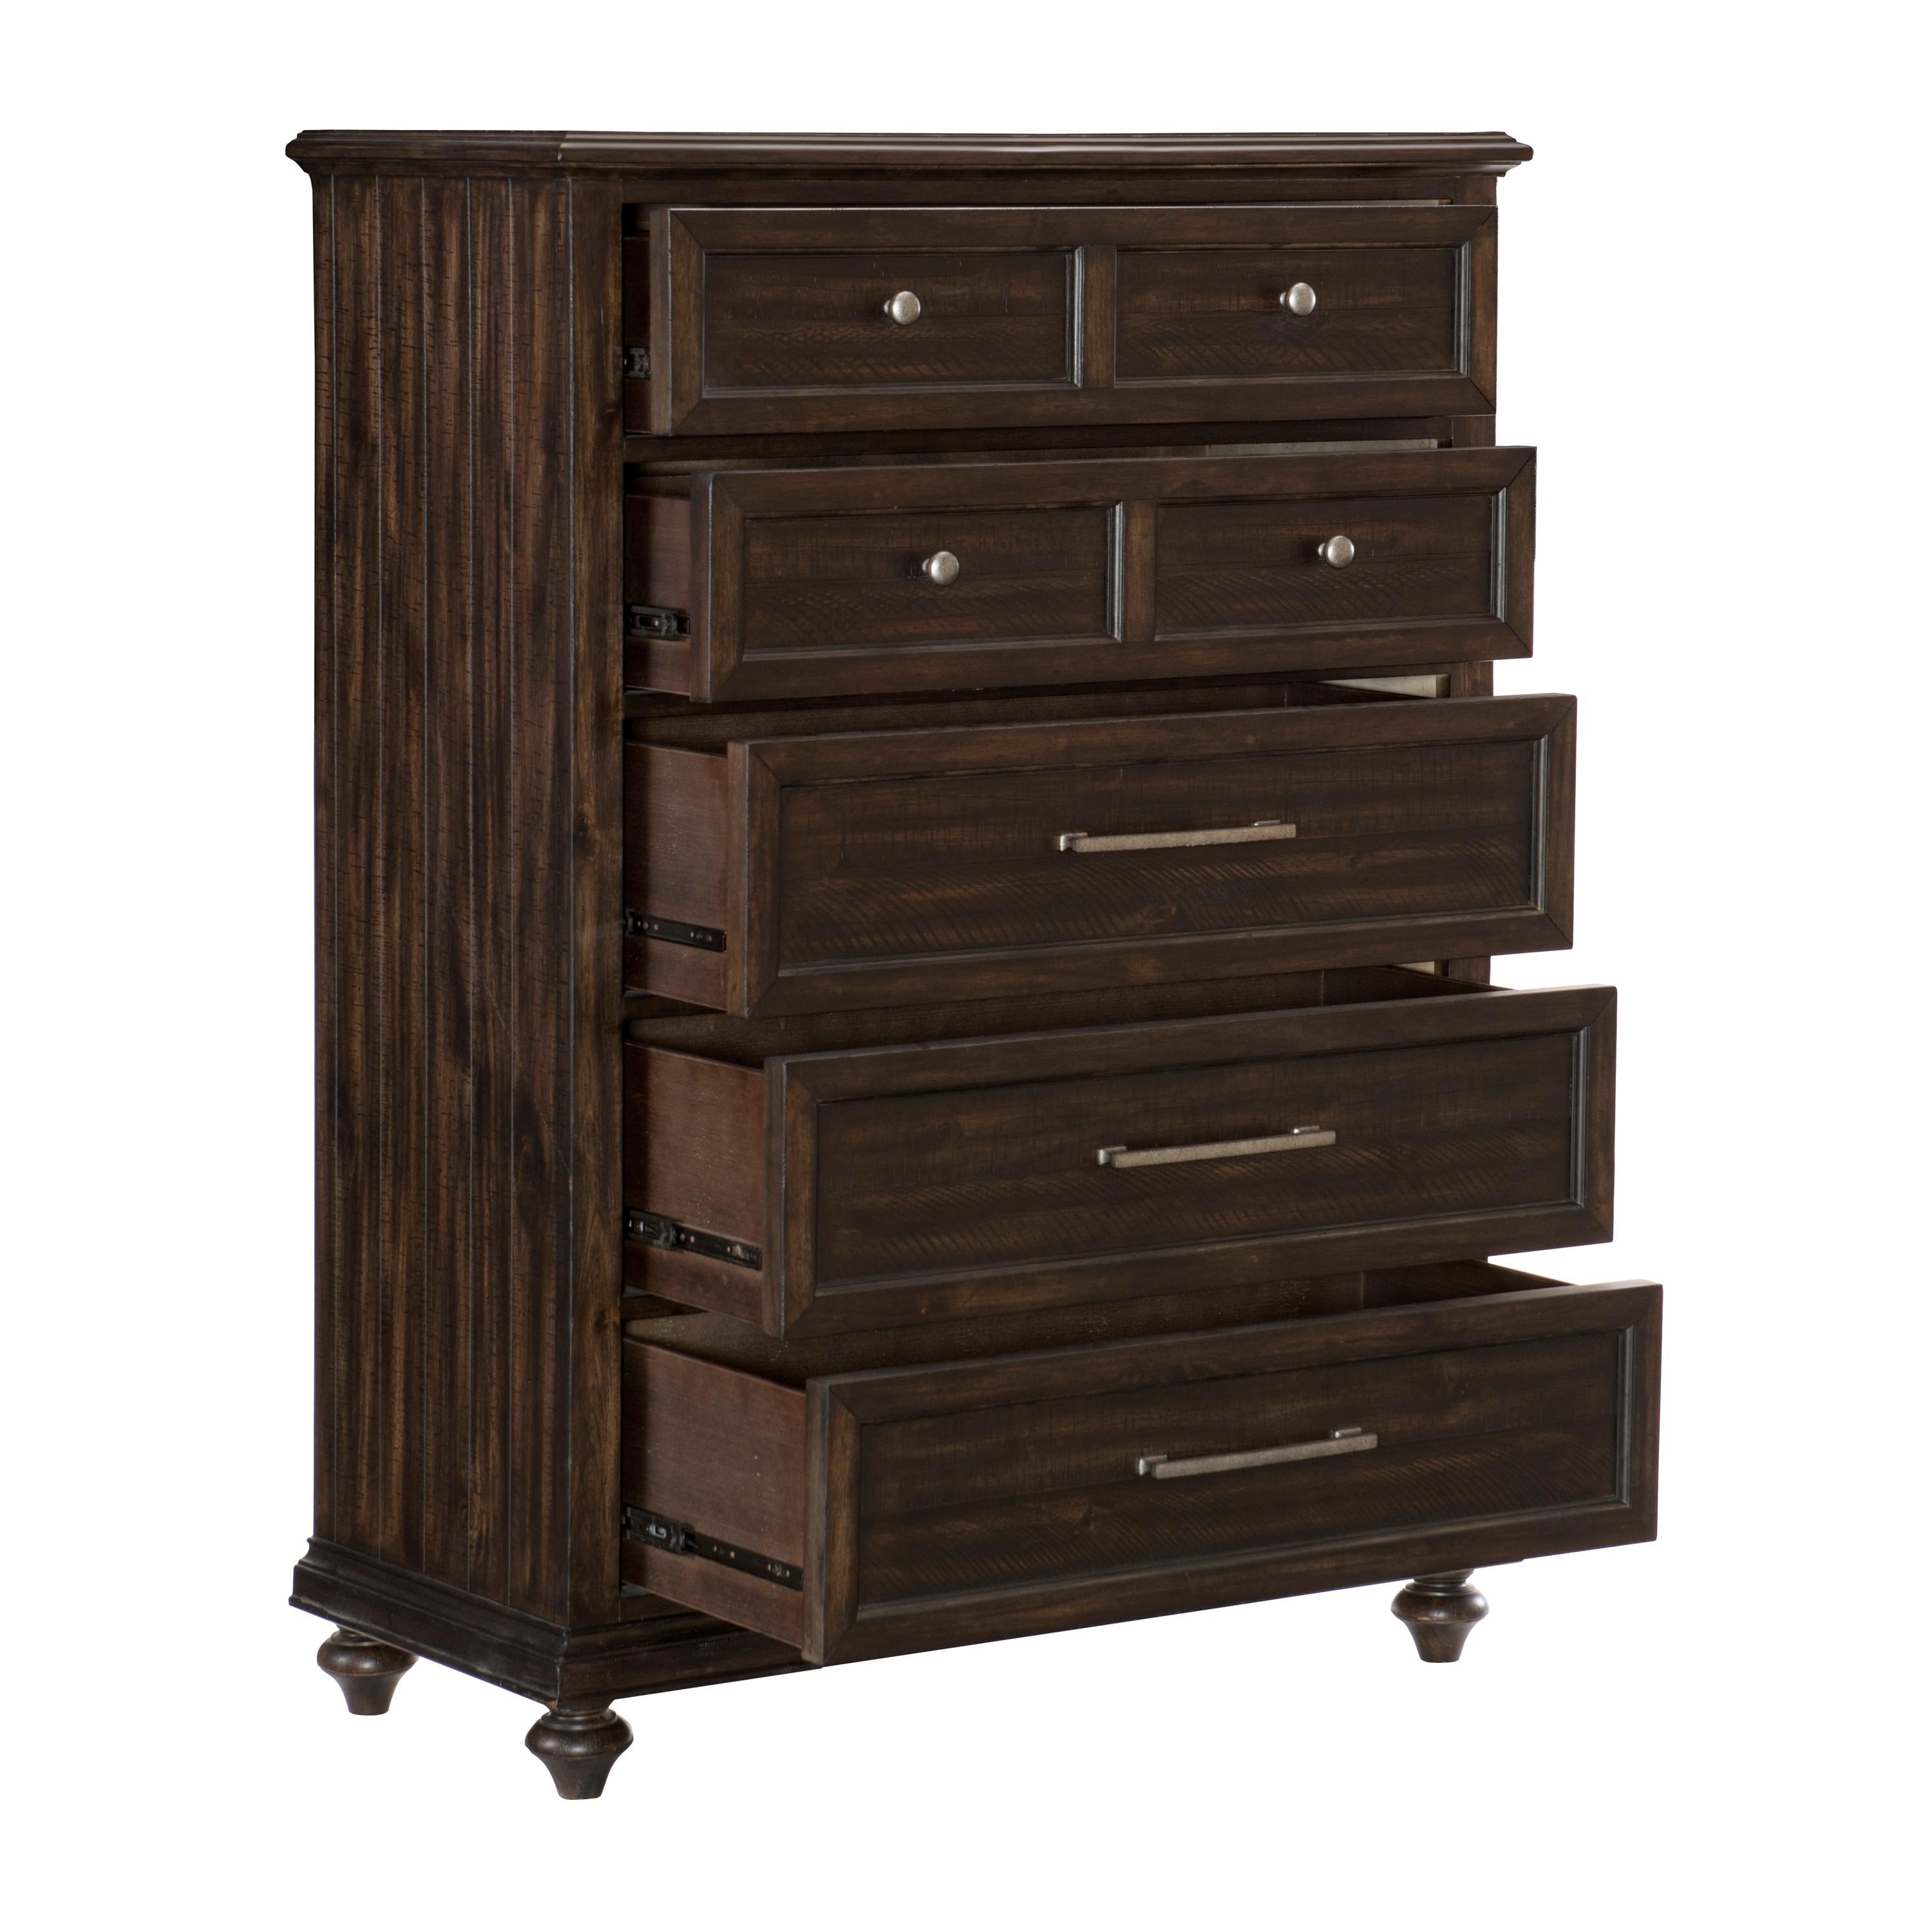 

    
Transitional Driftwood Charcoal Wood Chest Homelegance 1689-9 Cardano
